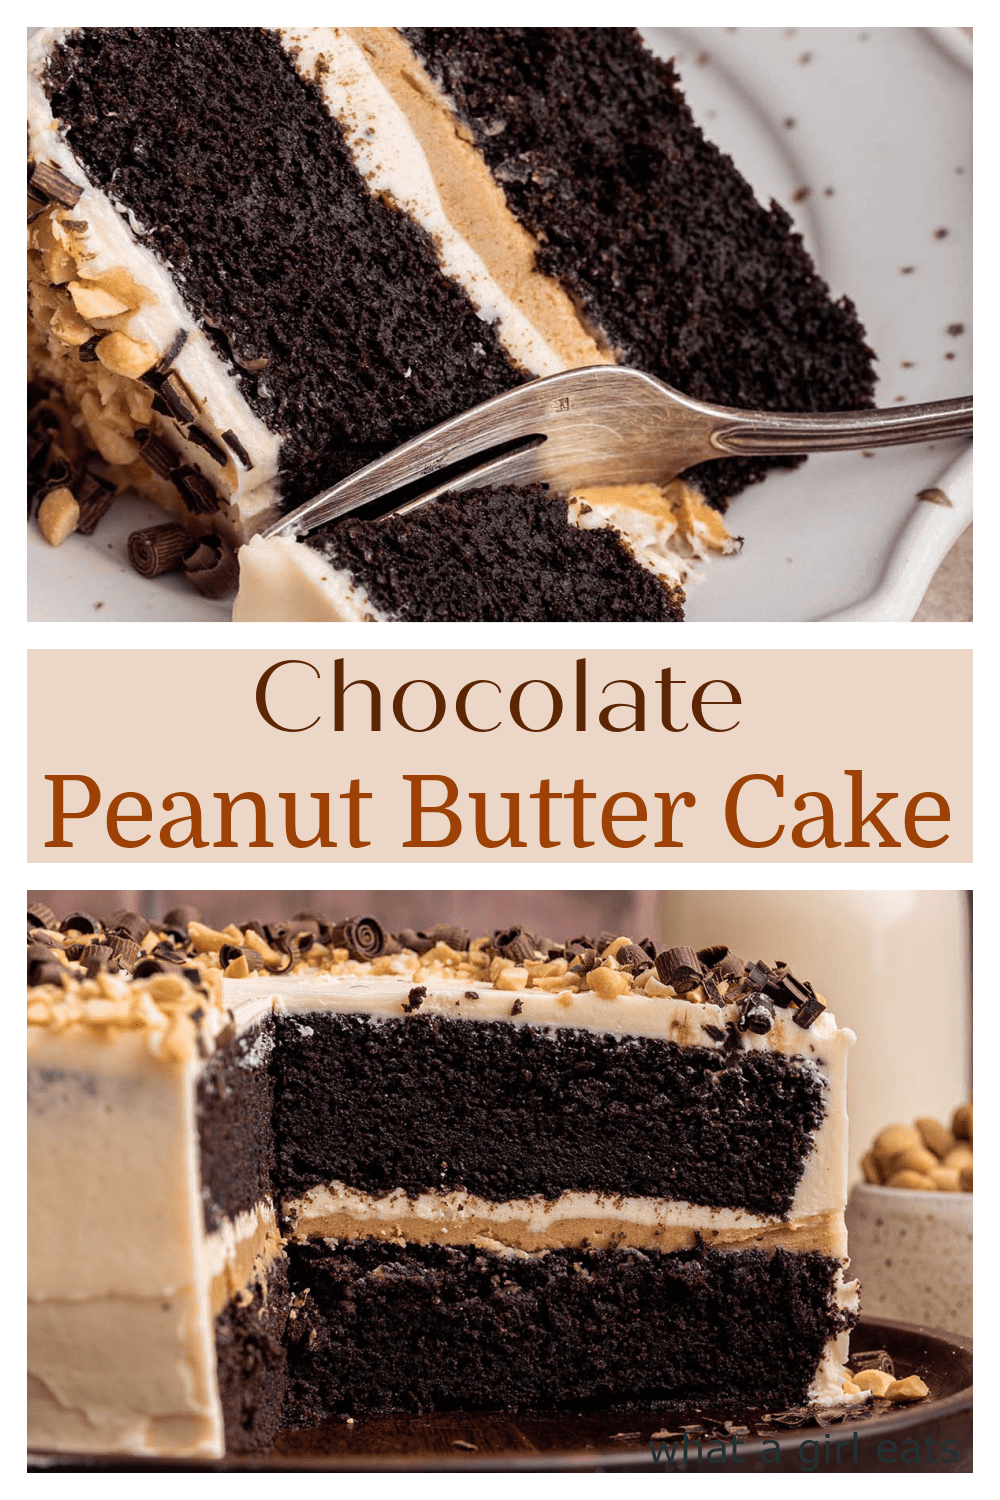 Chocolate peanut butter cake with peanut butter filling and peanut butter frosting. This delicious cake recipe is perfect for any occasion!